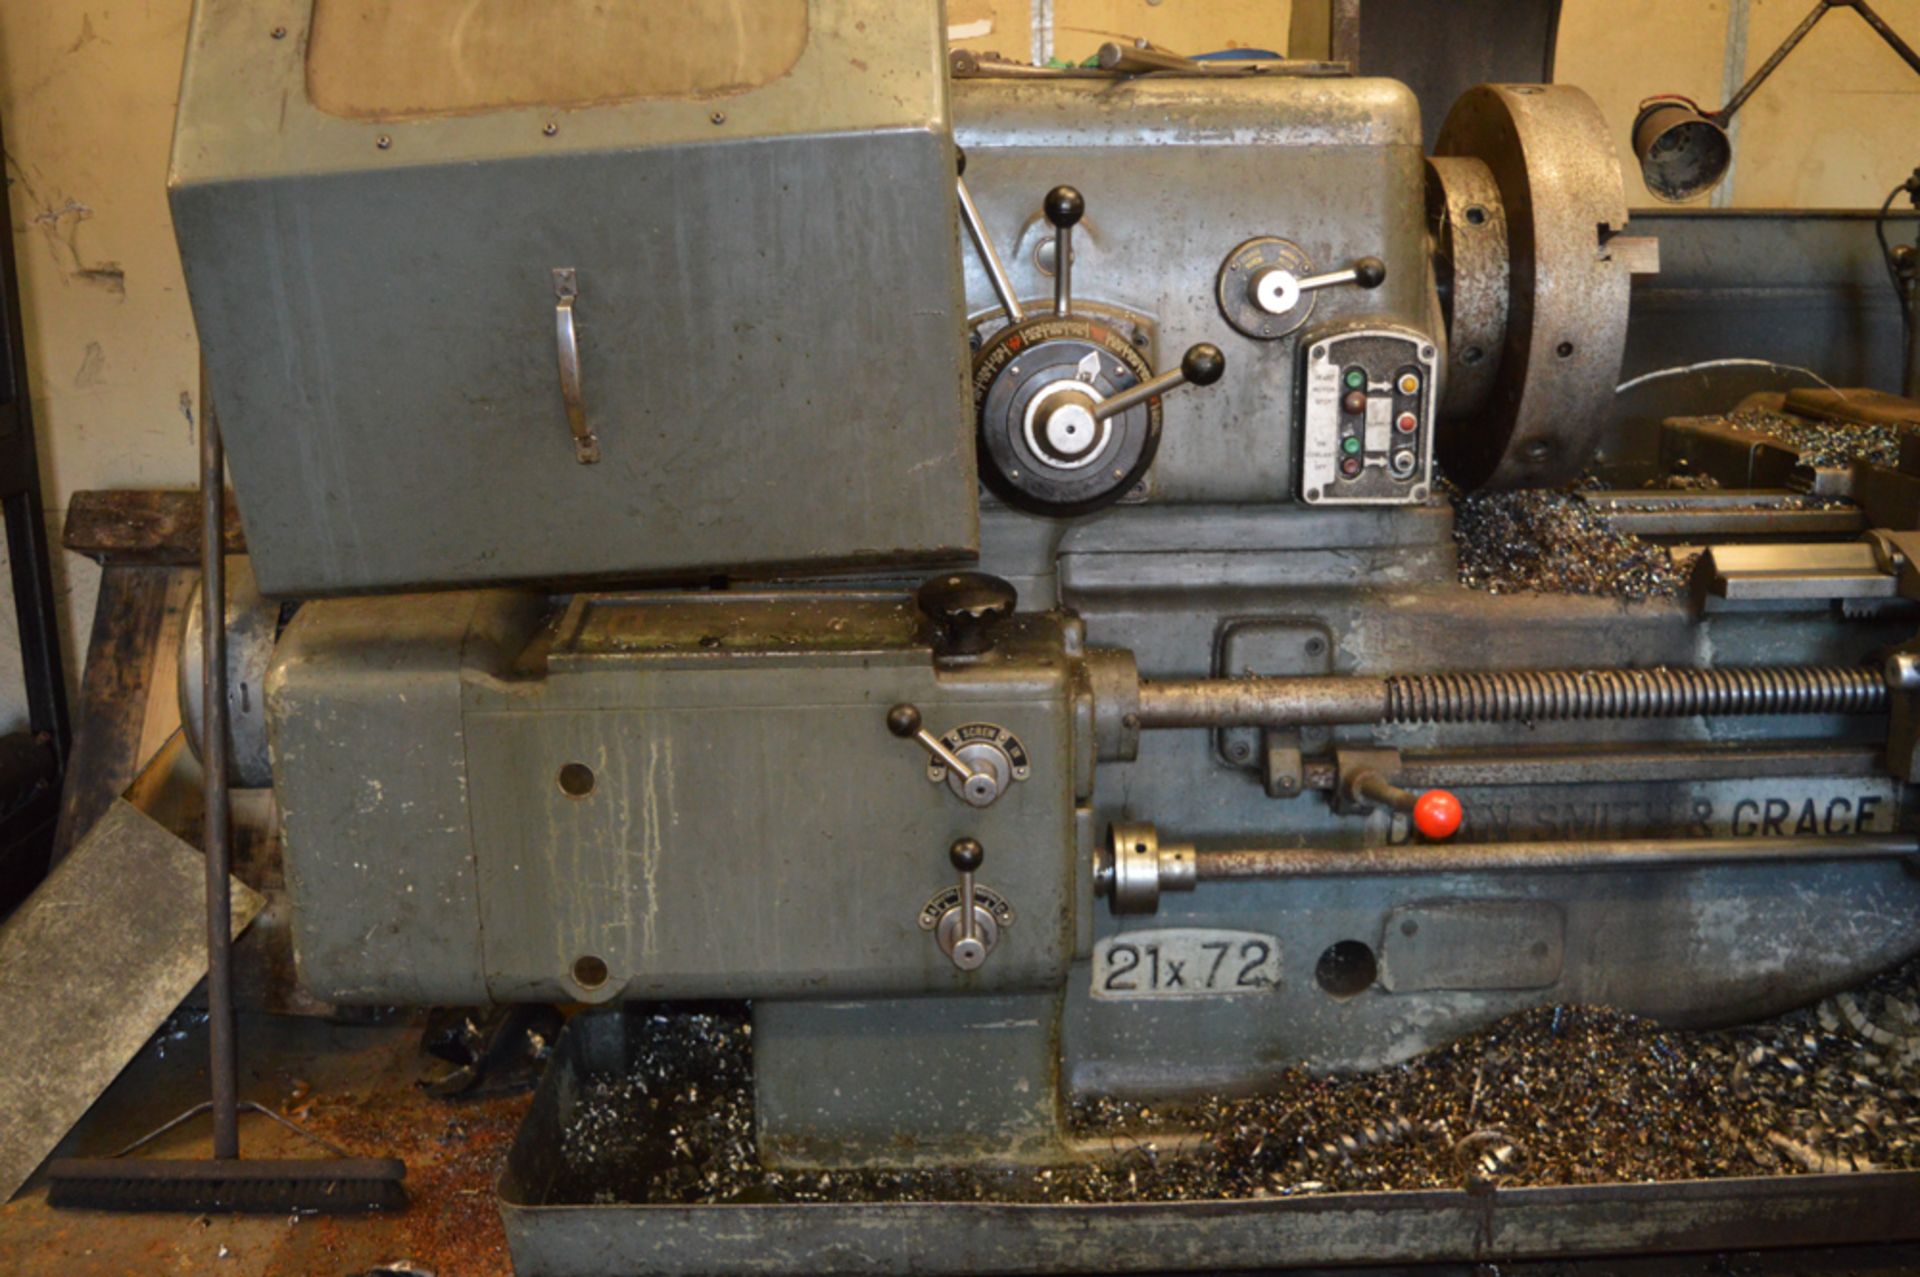 Dean Smith & Grace 21 inch & 72 inch gap bed centre lathe S/N: 12 inch swing 6 ft bed c/w 2 - Image 3 of 8